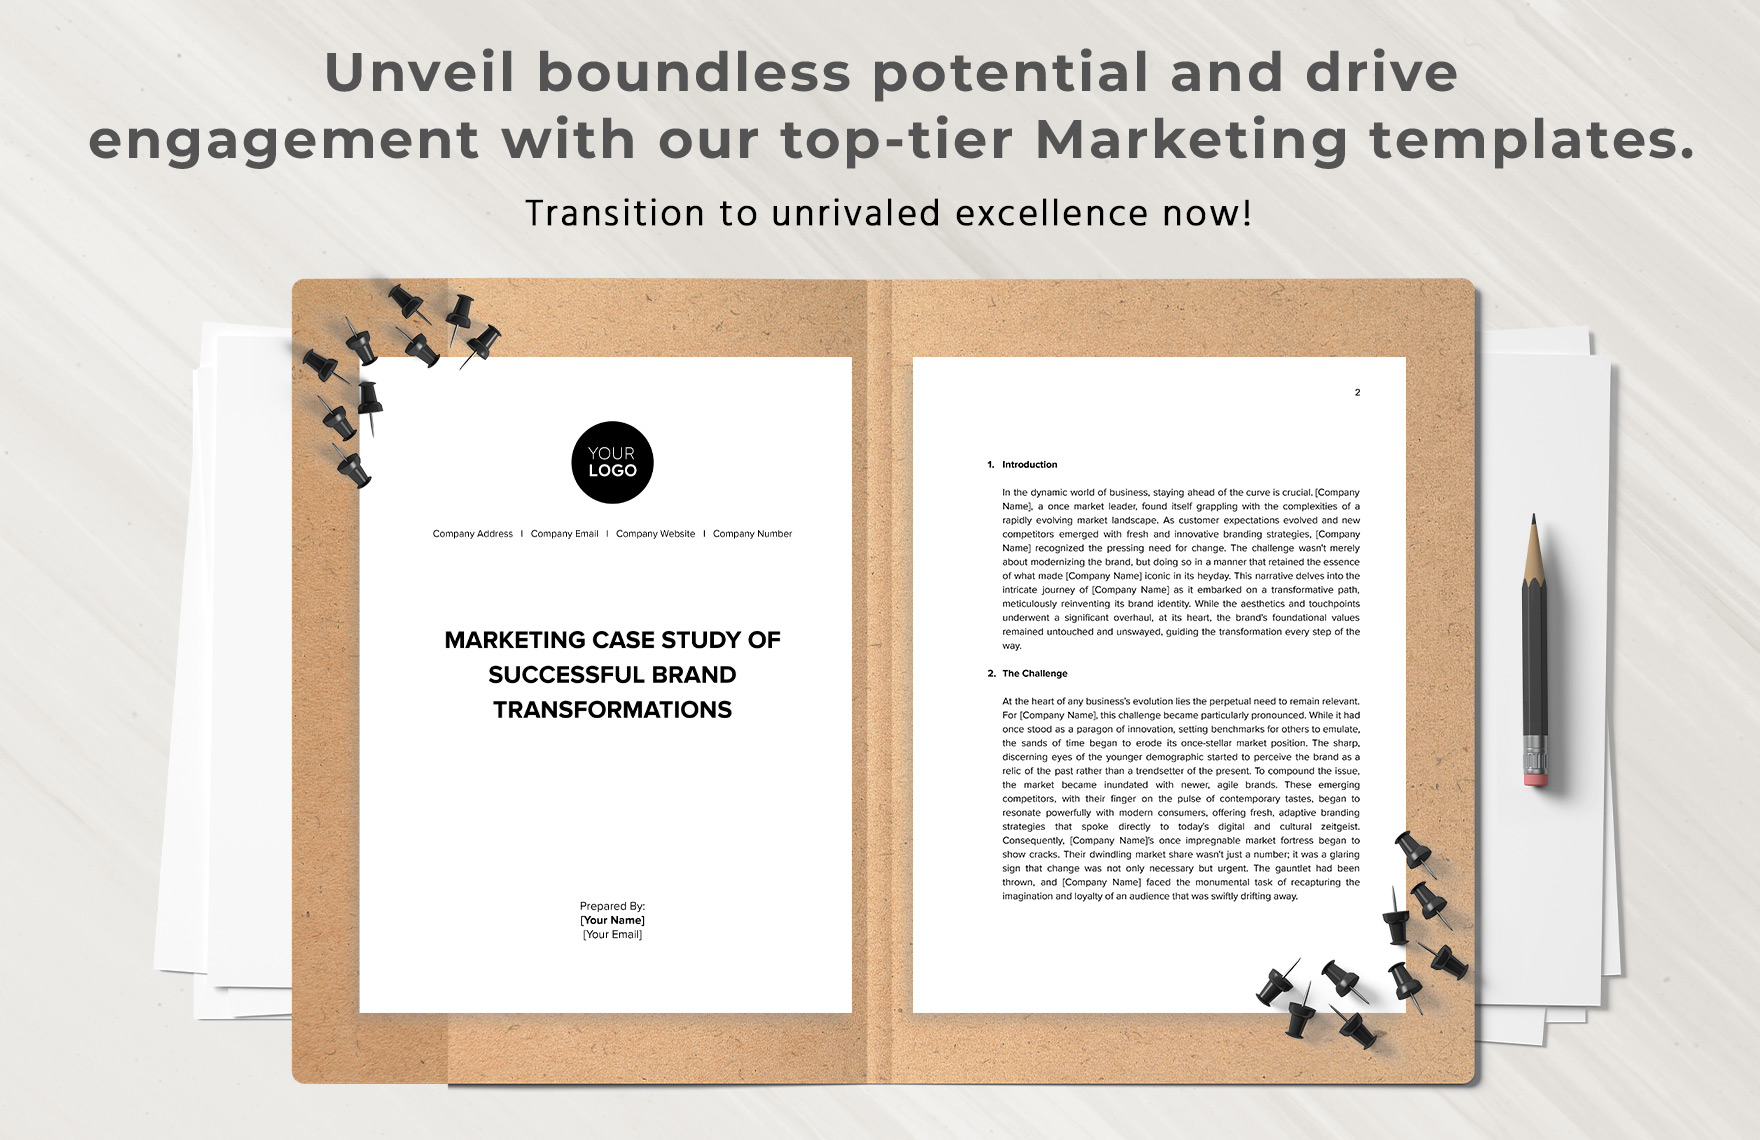 Marketing Case Study of Successful Brand Transformations Template